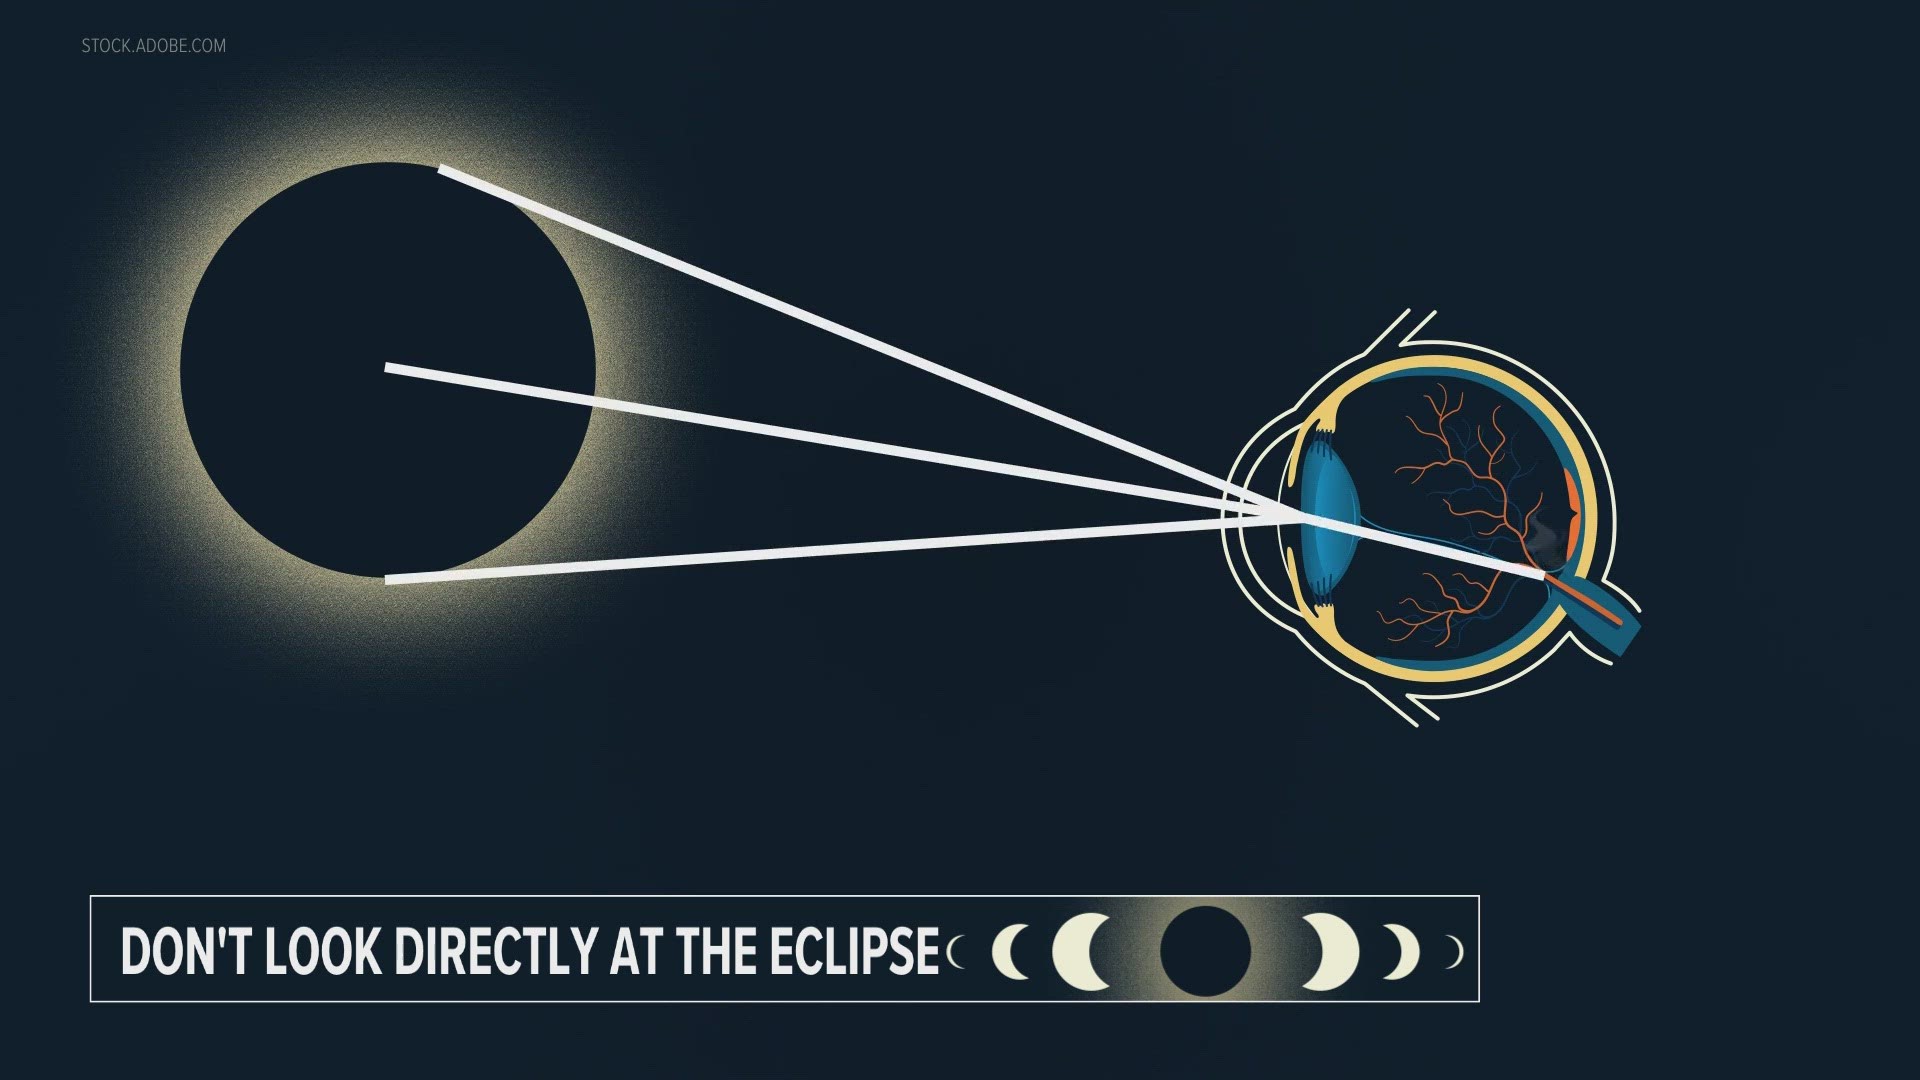 Looking at the eclipse with your naked eye can cause permanent damage in blind spots or full blindness.